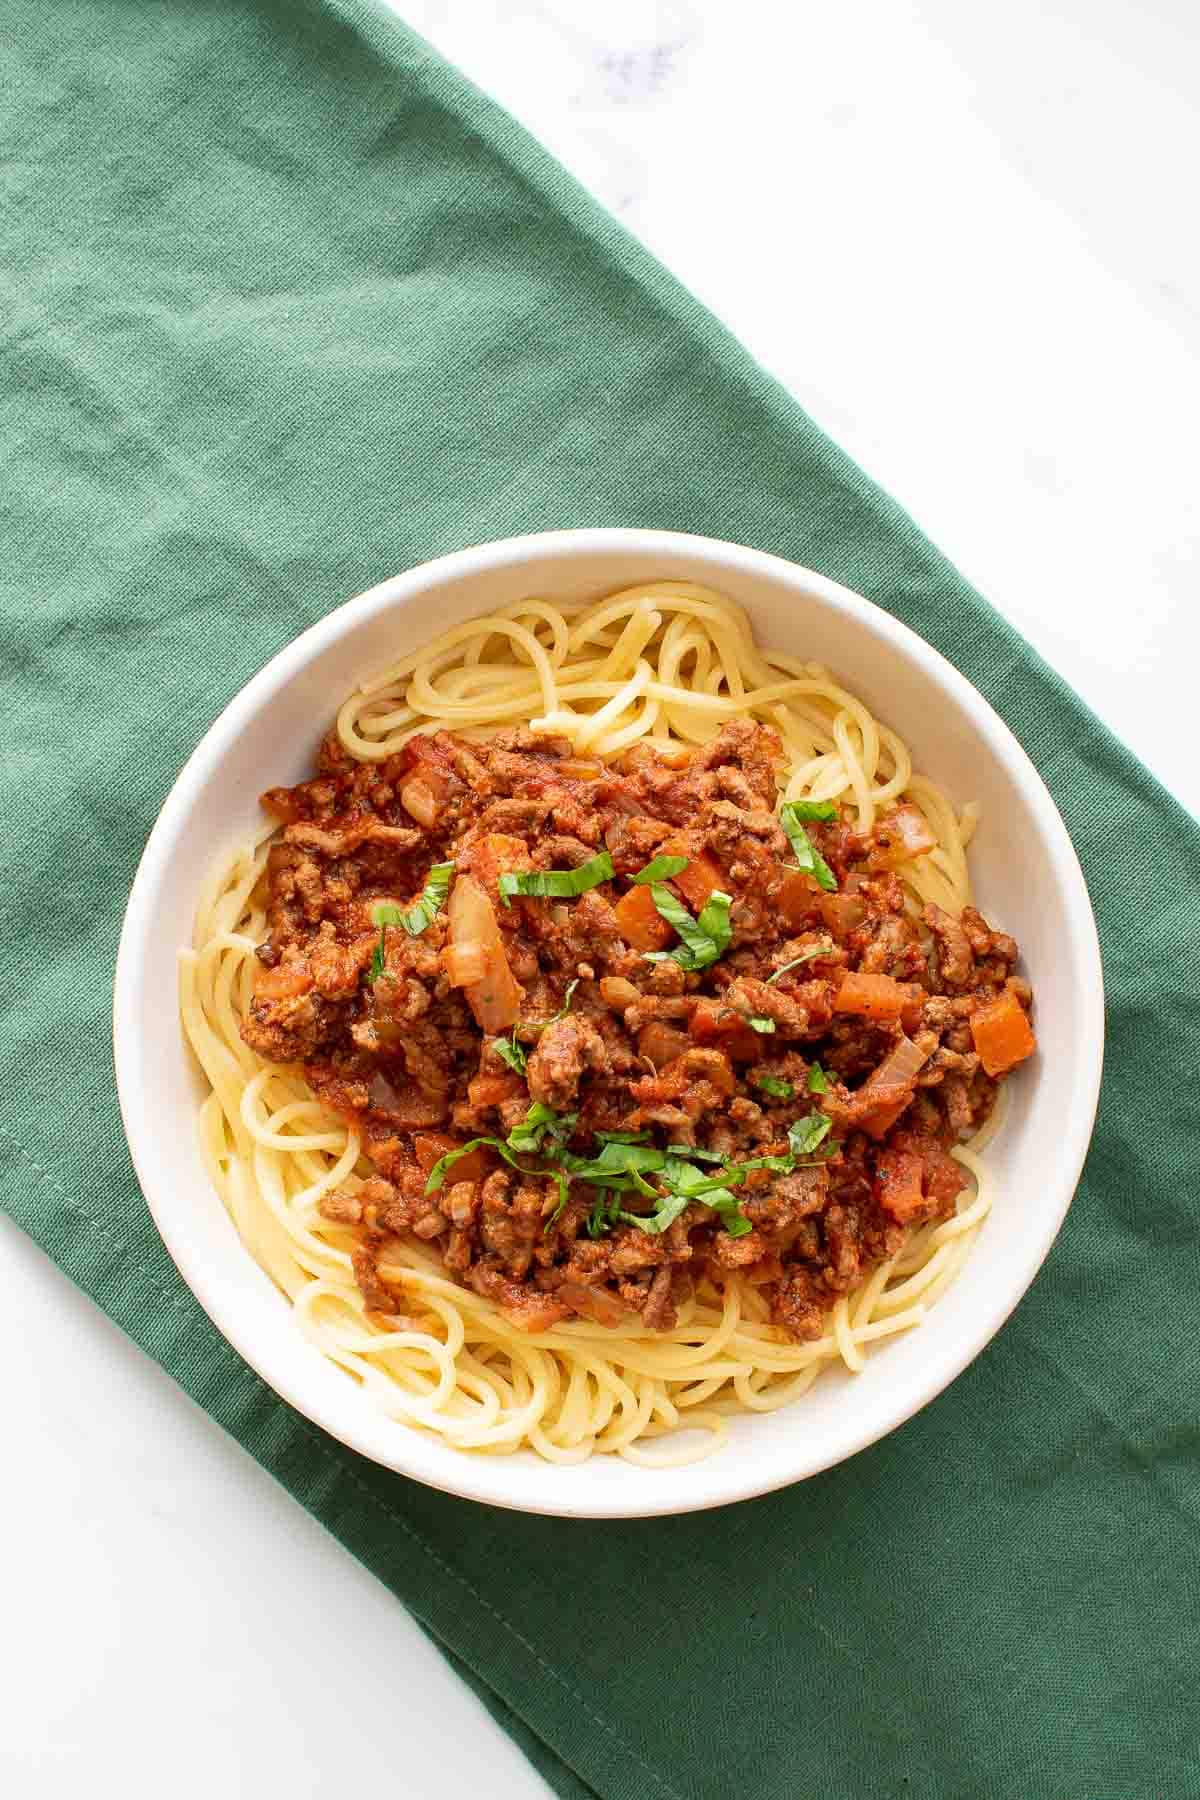 A bowl of pasta with bolognese sauce.